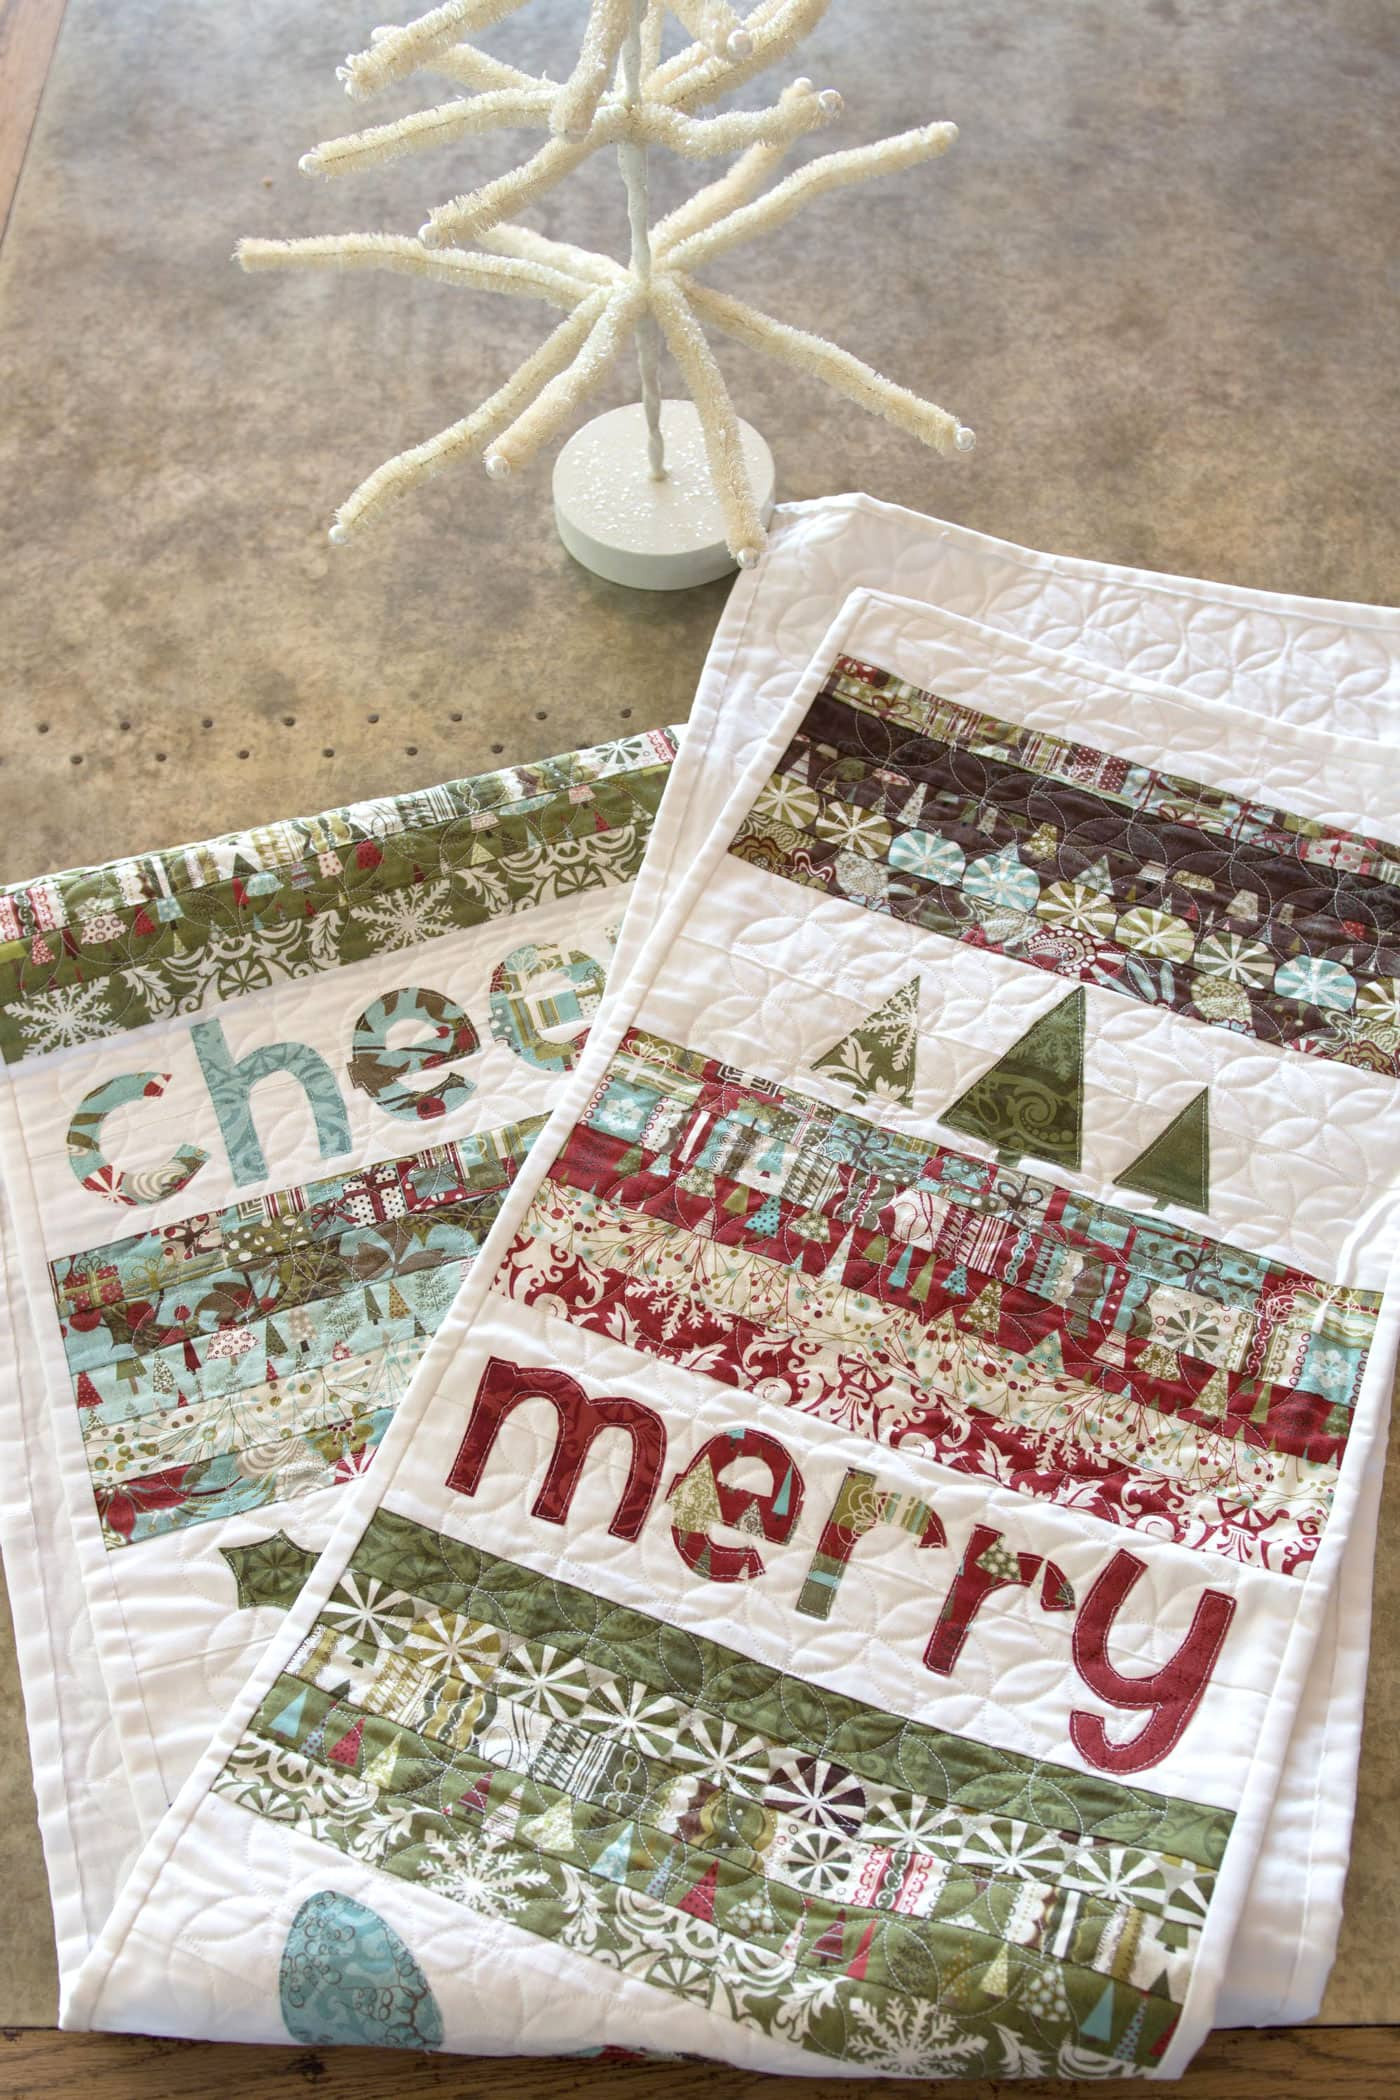 Free Christmas Table Runner Patterns
 Merry & Cheer Quilted Christmas Table Runner Pattern The